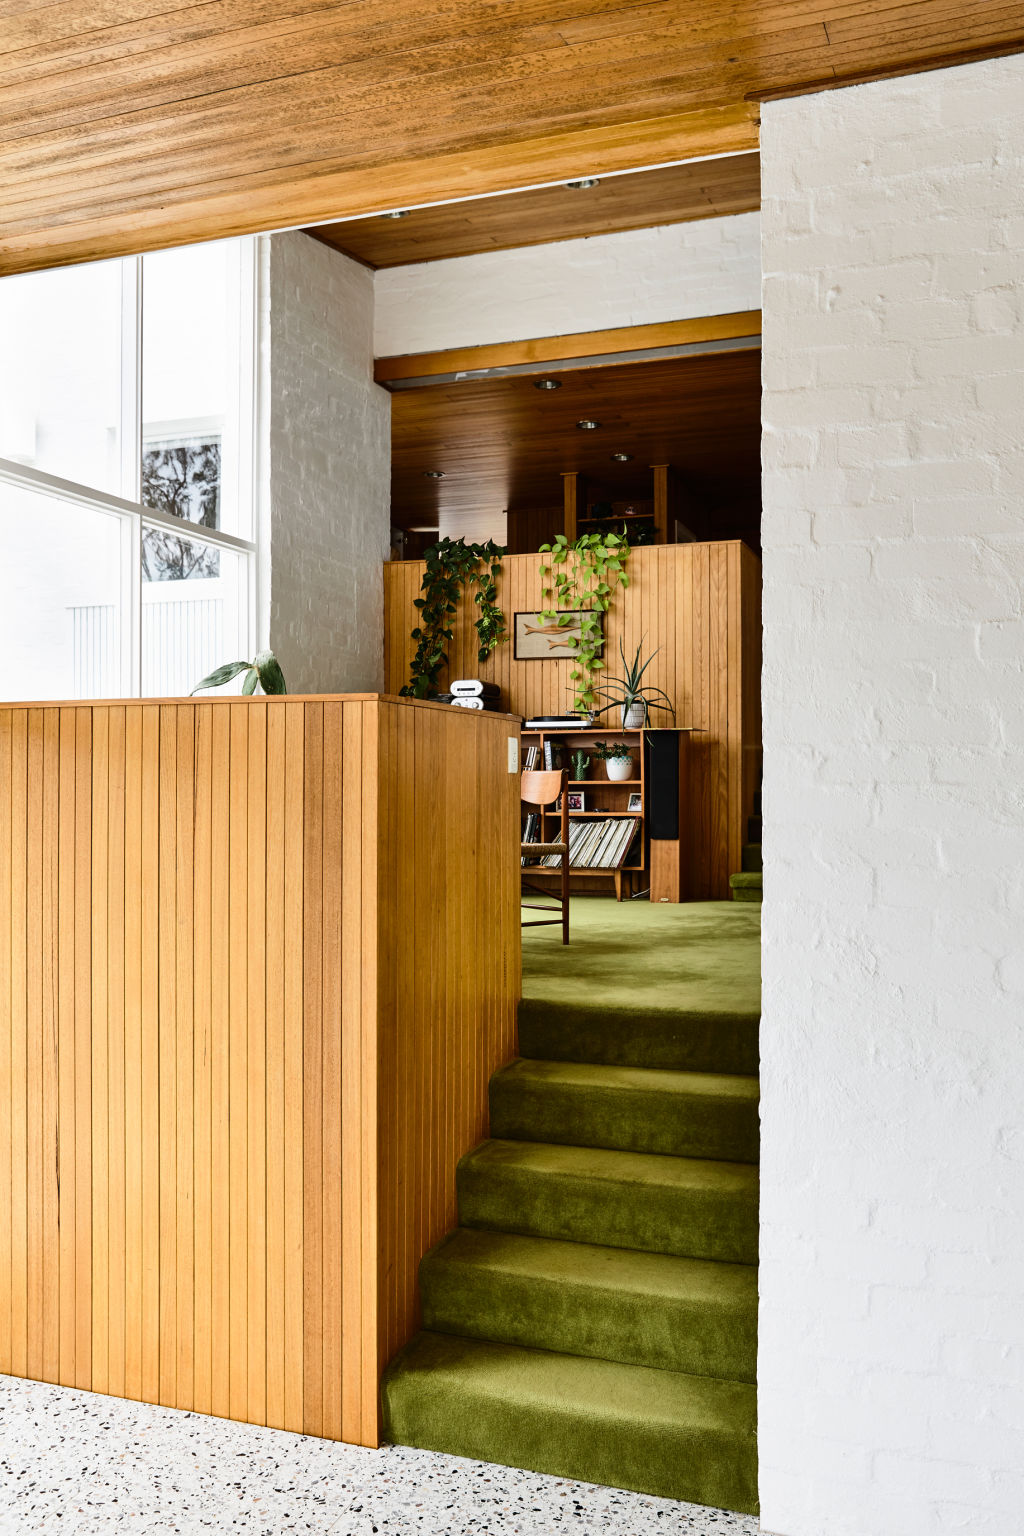 There are stairs and split levels everywhere in this house. Photo: Derek Swalwell